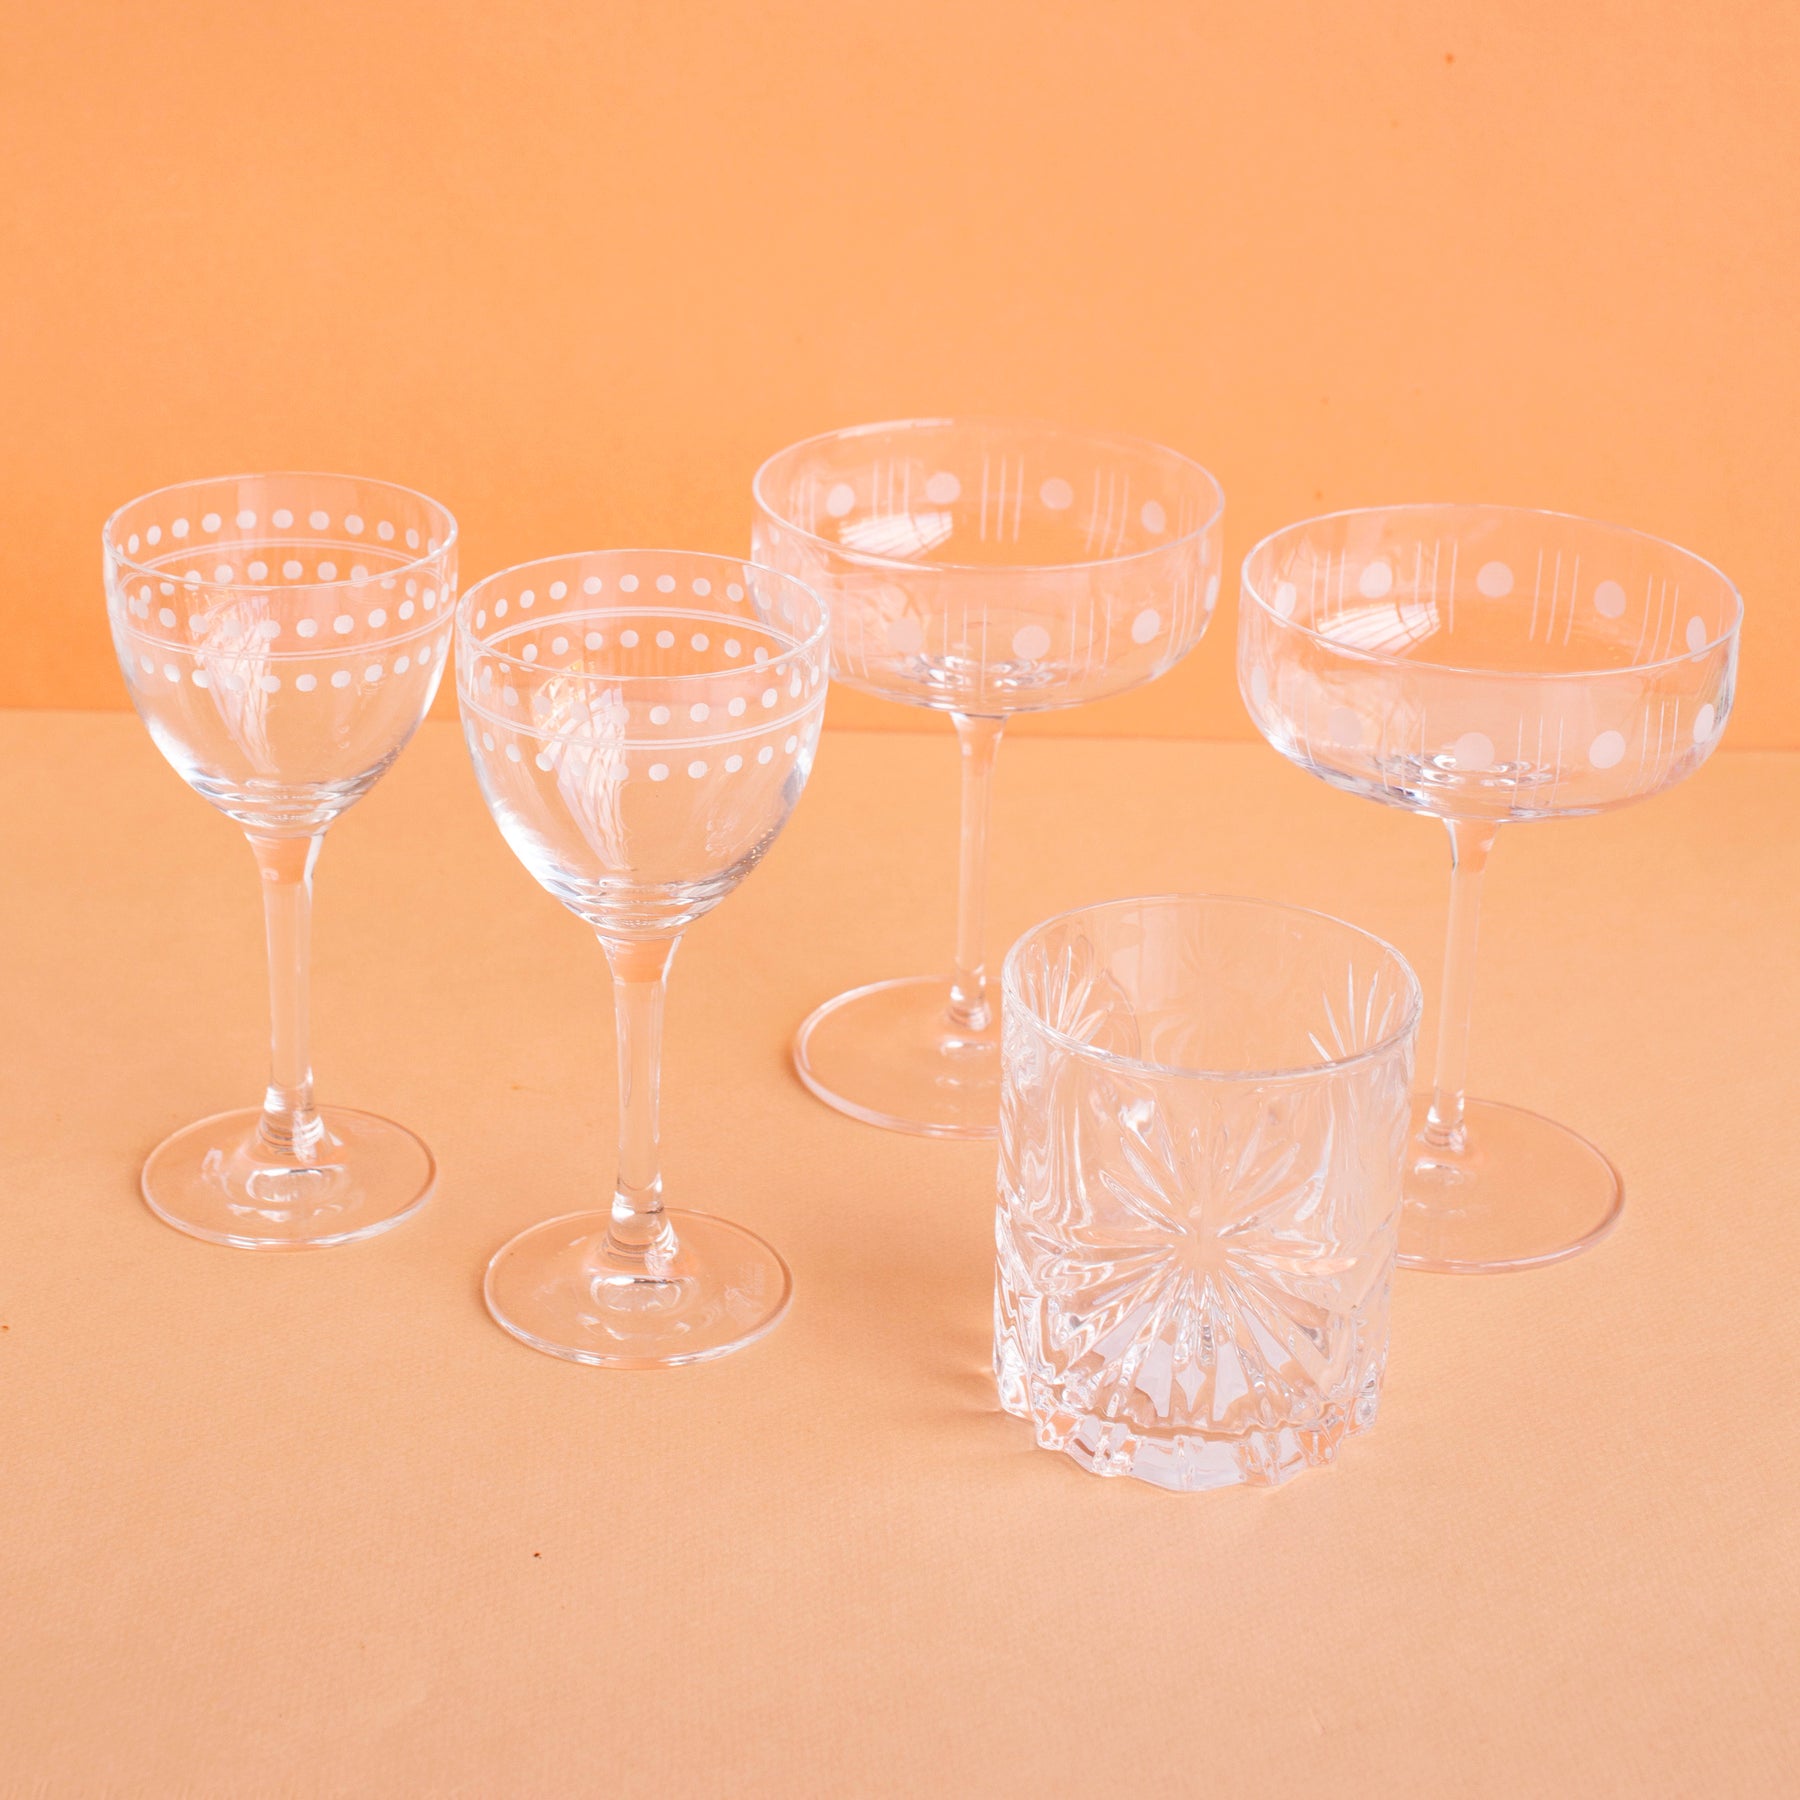 Vintage Art Deco Nick and Nora Coupe Glasses, Set of 4